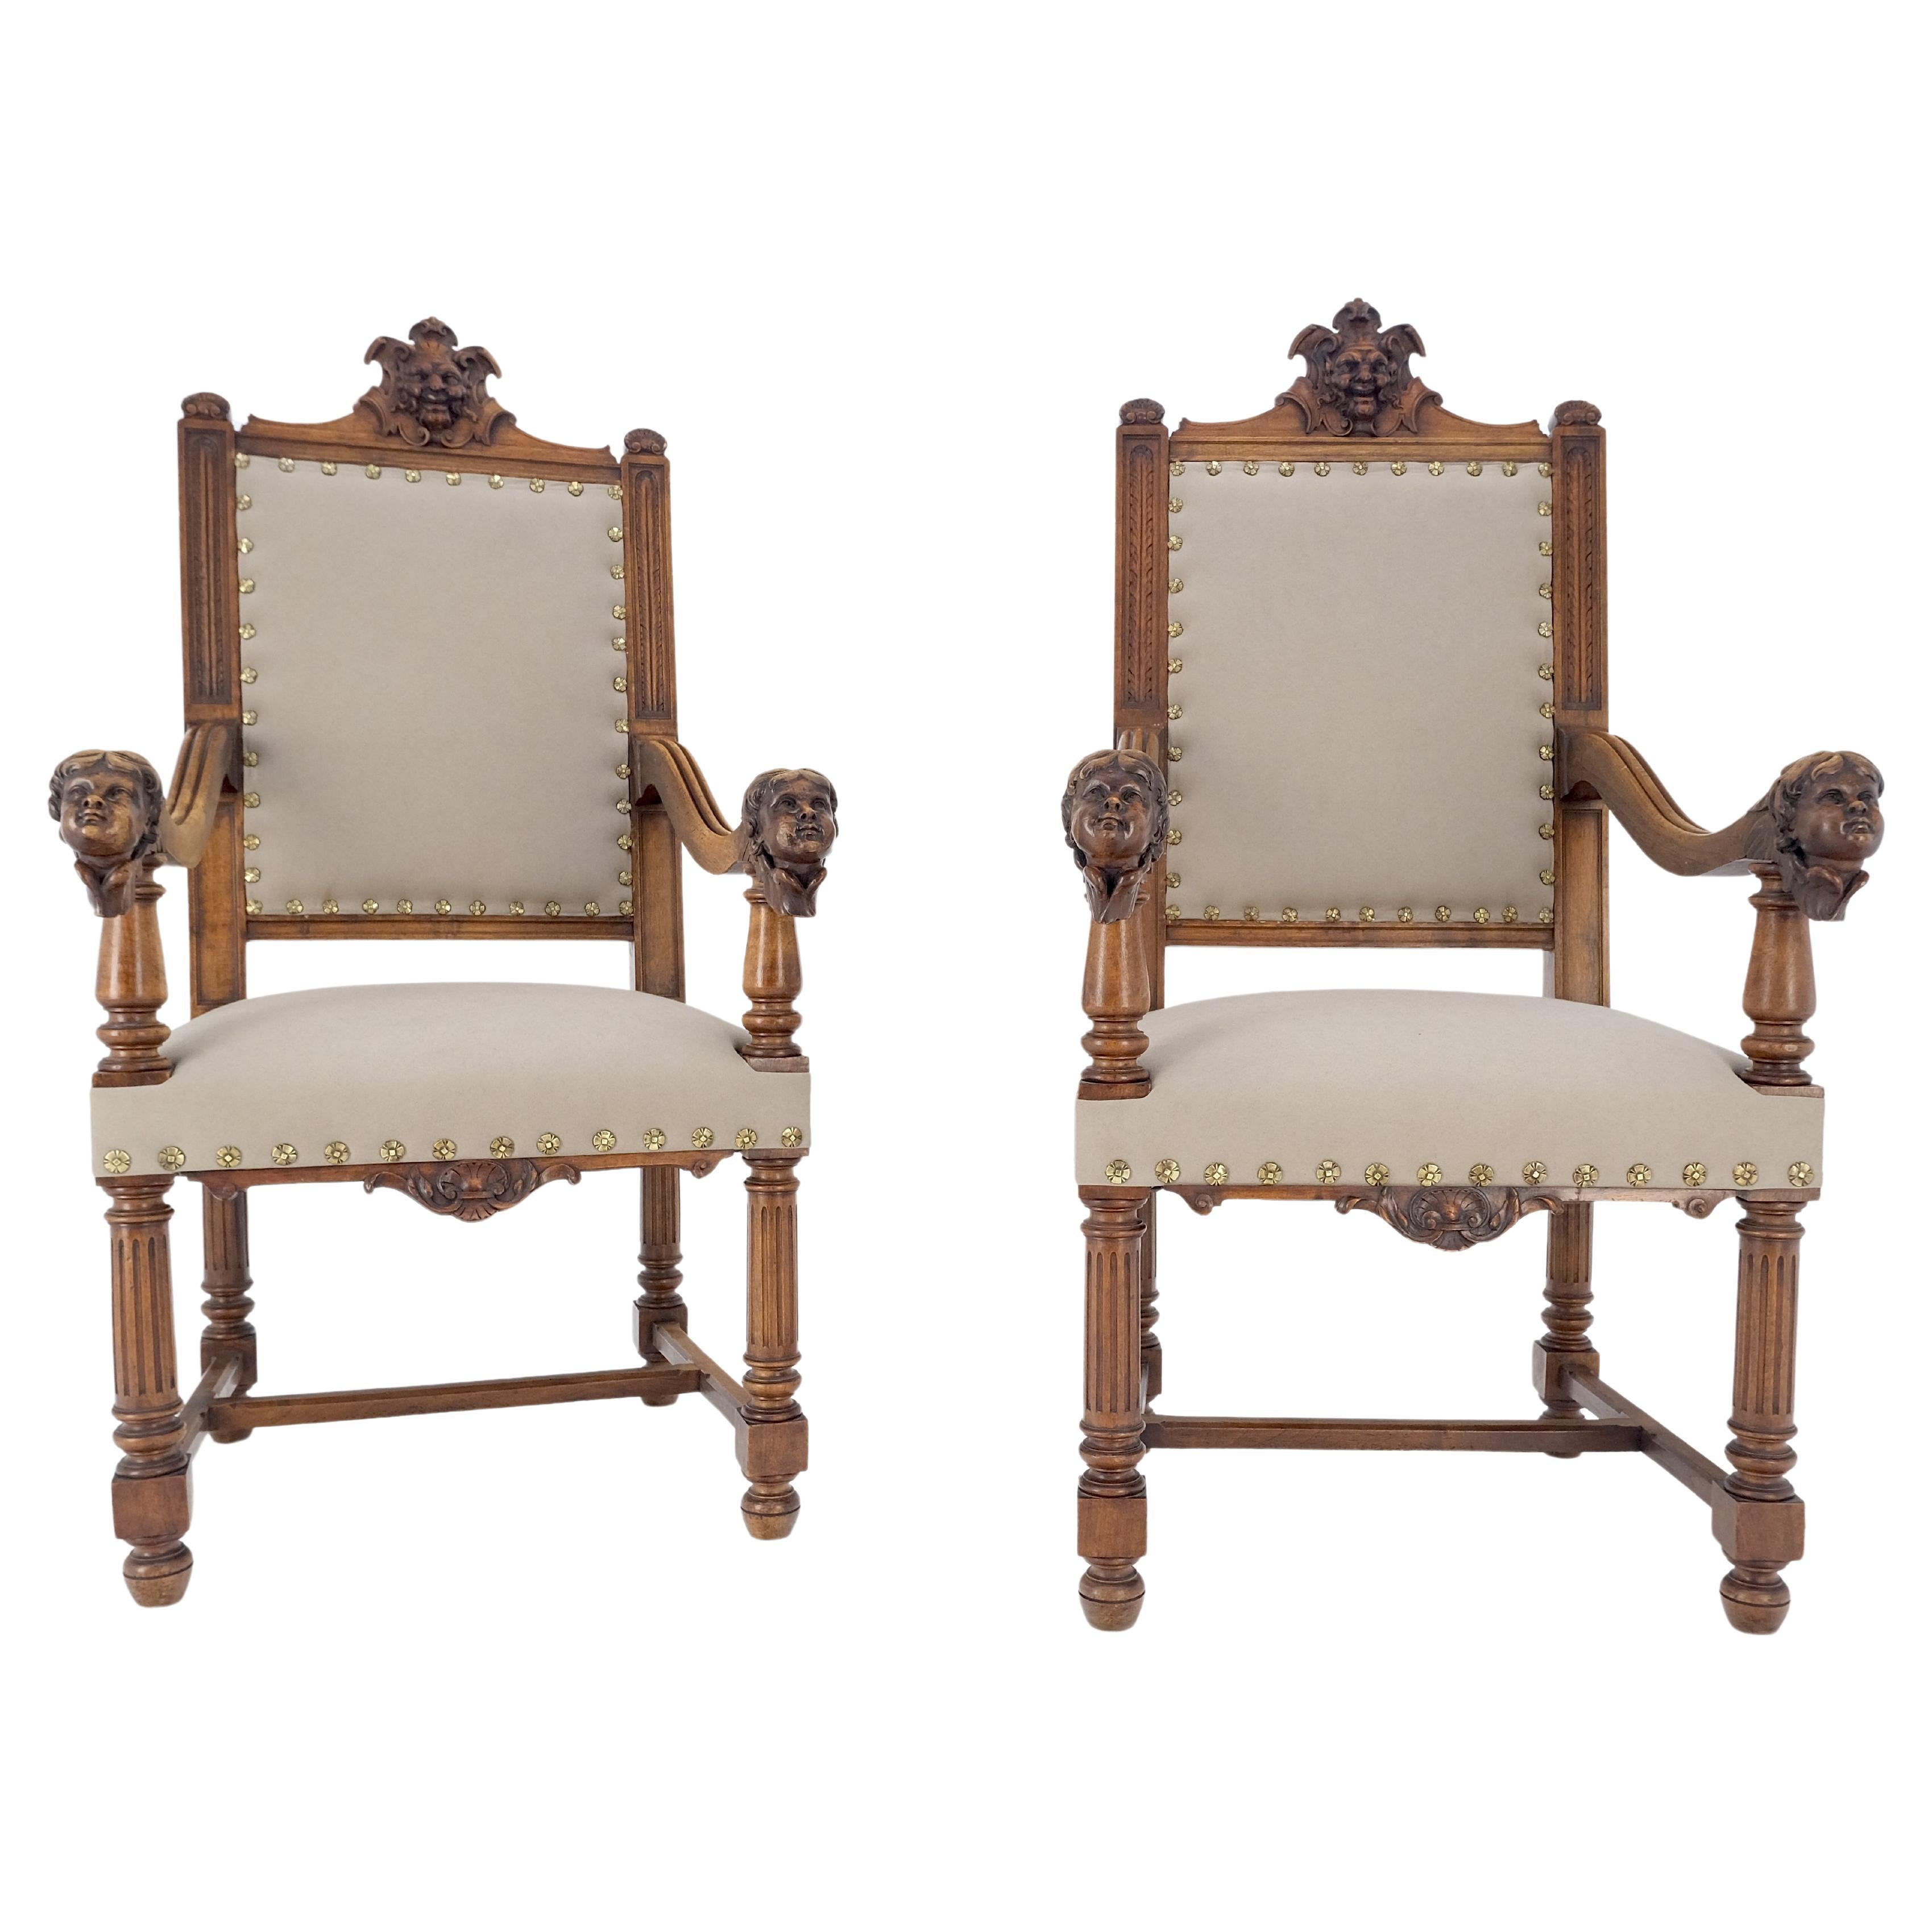 Pair Antique Heavily Carved Walnut Cherub North Wind Faces Arm Chairs New Upholstery MINT!